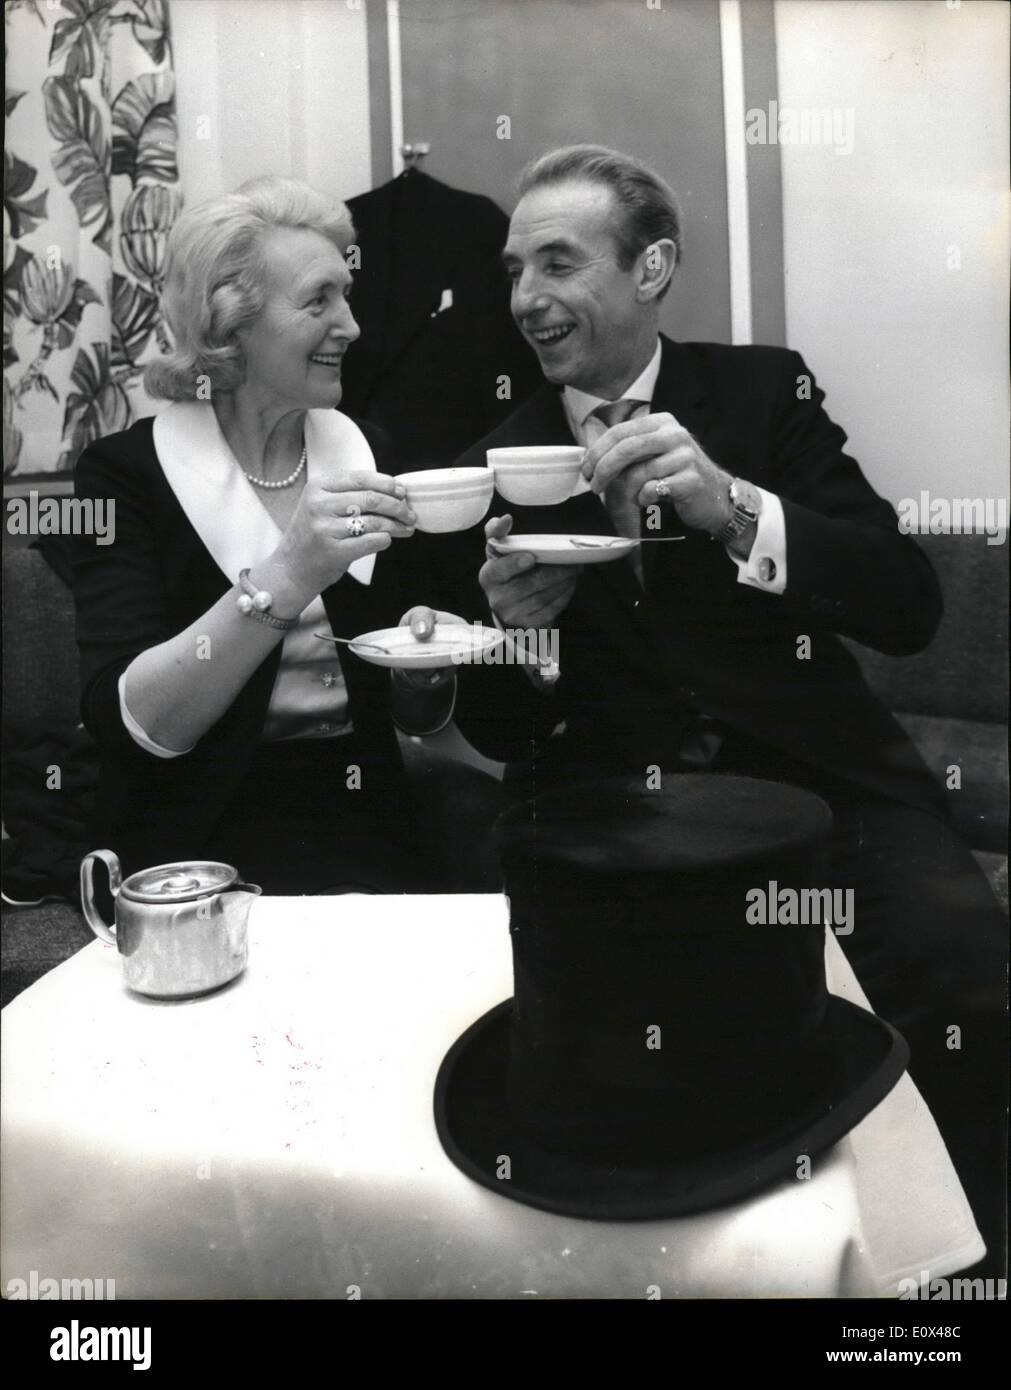 Feb. 02, 1965 - Sir Stanley And Lady - Drink A Toast - In Tea: World's most popular soccer star - Stanley Matthews and his wife Stock Photo